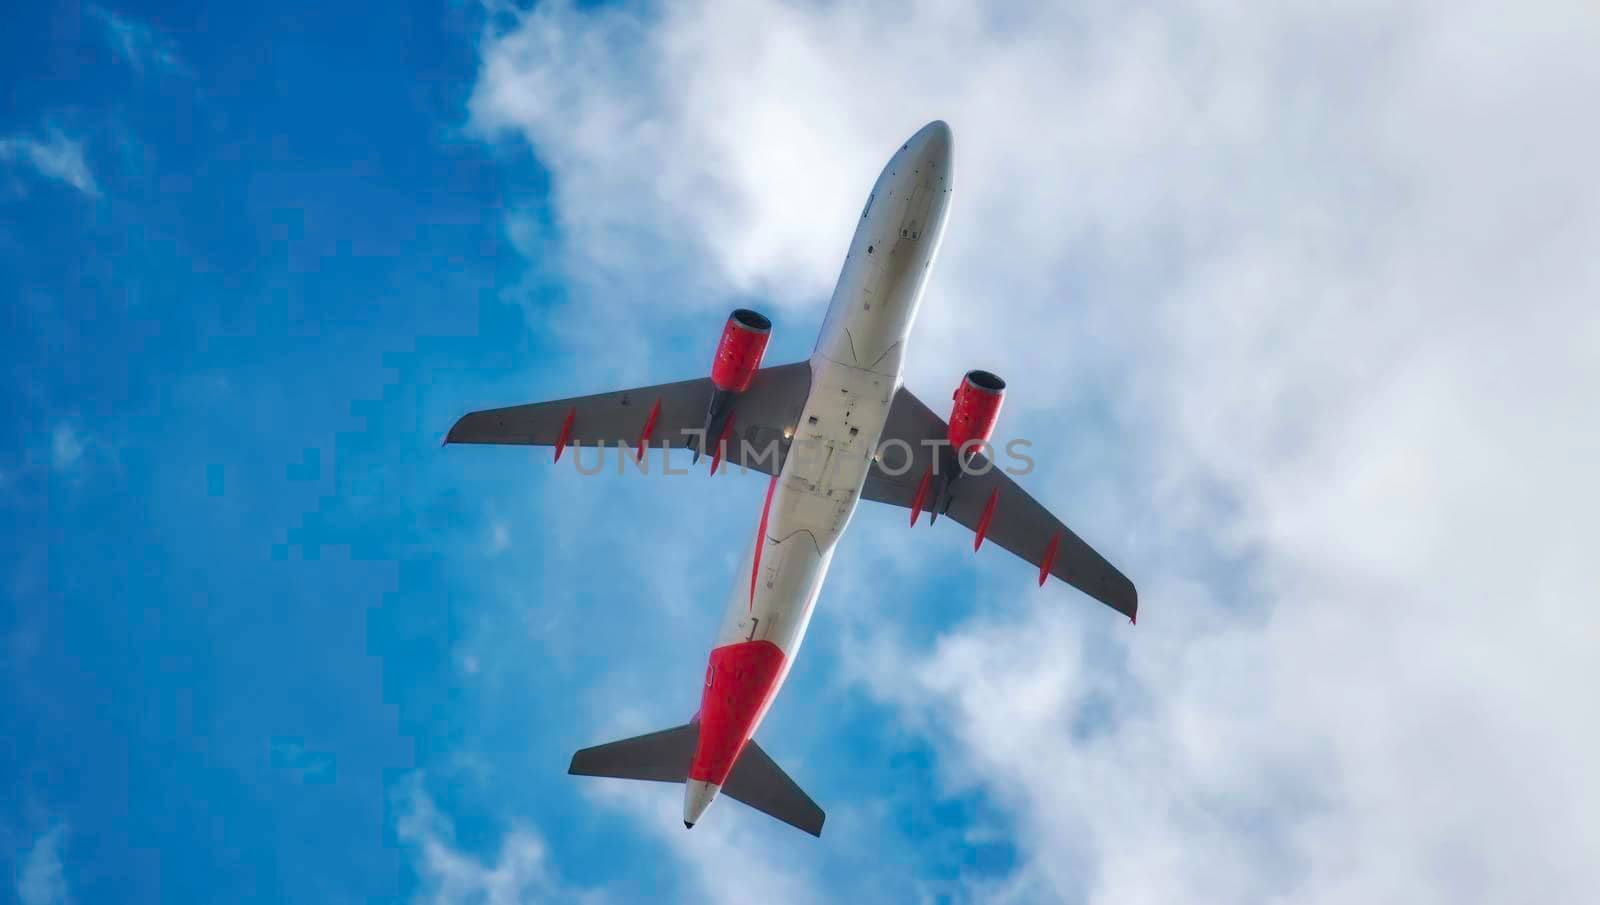 Underbelly of a jet airplane flying in the air isolated against a blue sky with clouds by tennesseewitney